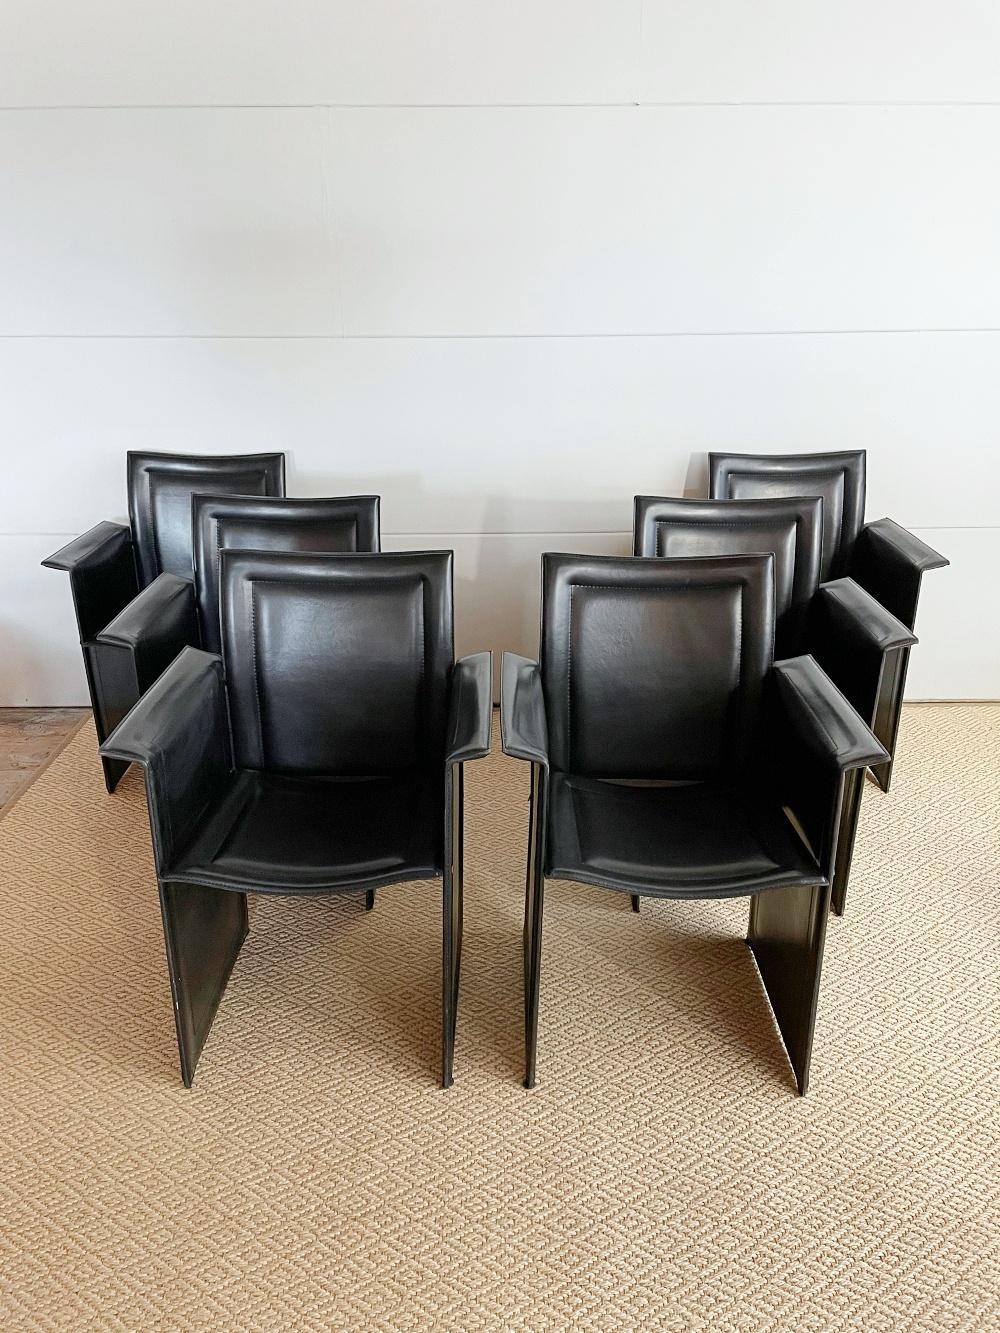 A set of six Postmodern sculptural dining chairs designed by Tito Agnoli and handmade by Calligaris in Italy, 1980s. They feature a metal construction covered with thick black leather. The chairs are very elegant and high comfortable. 

